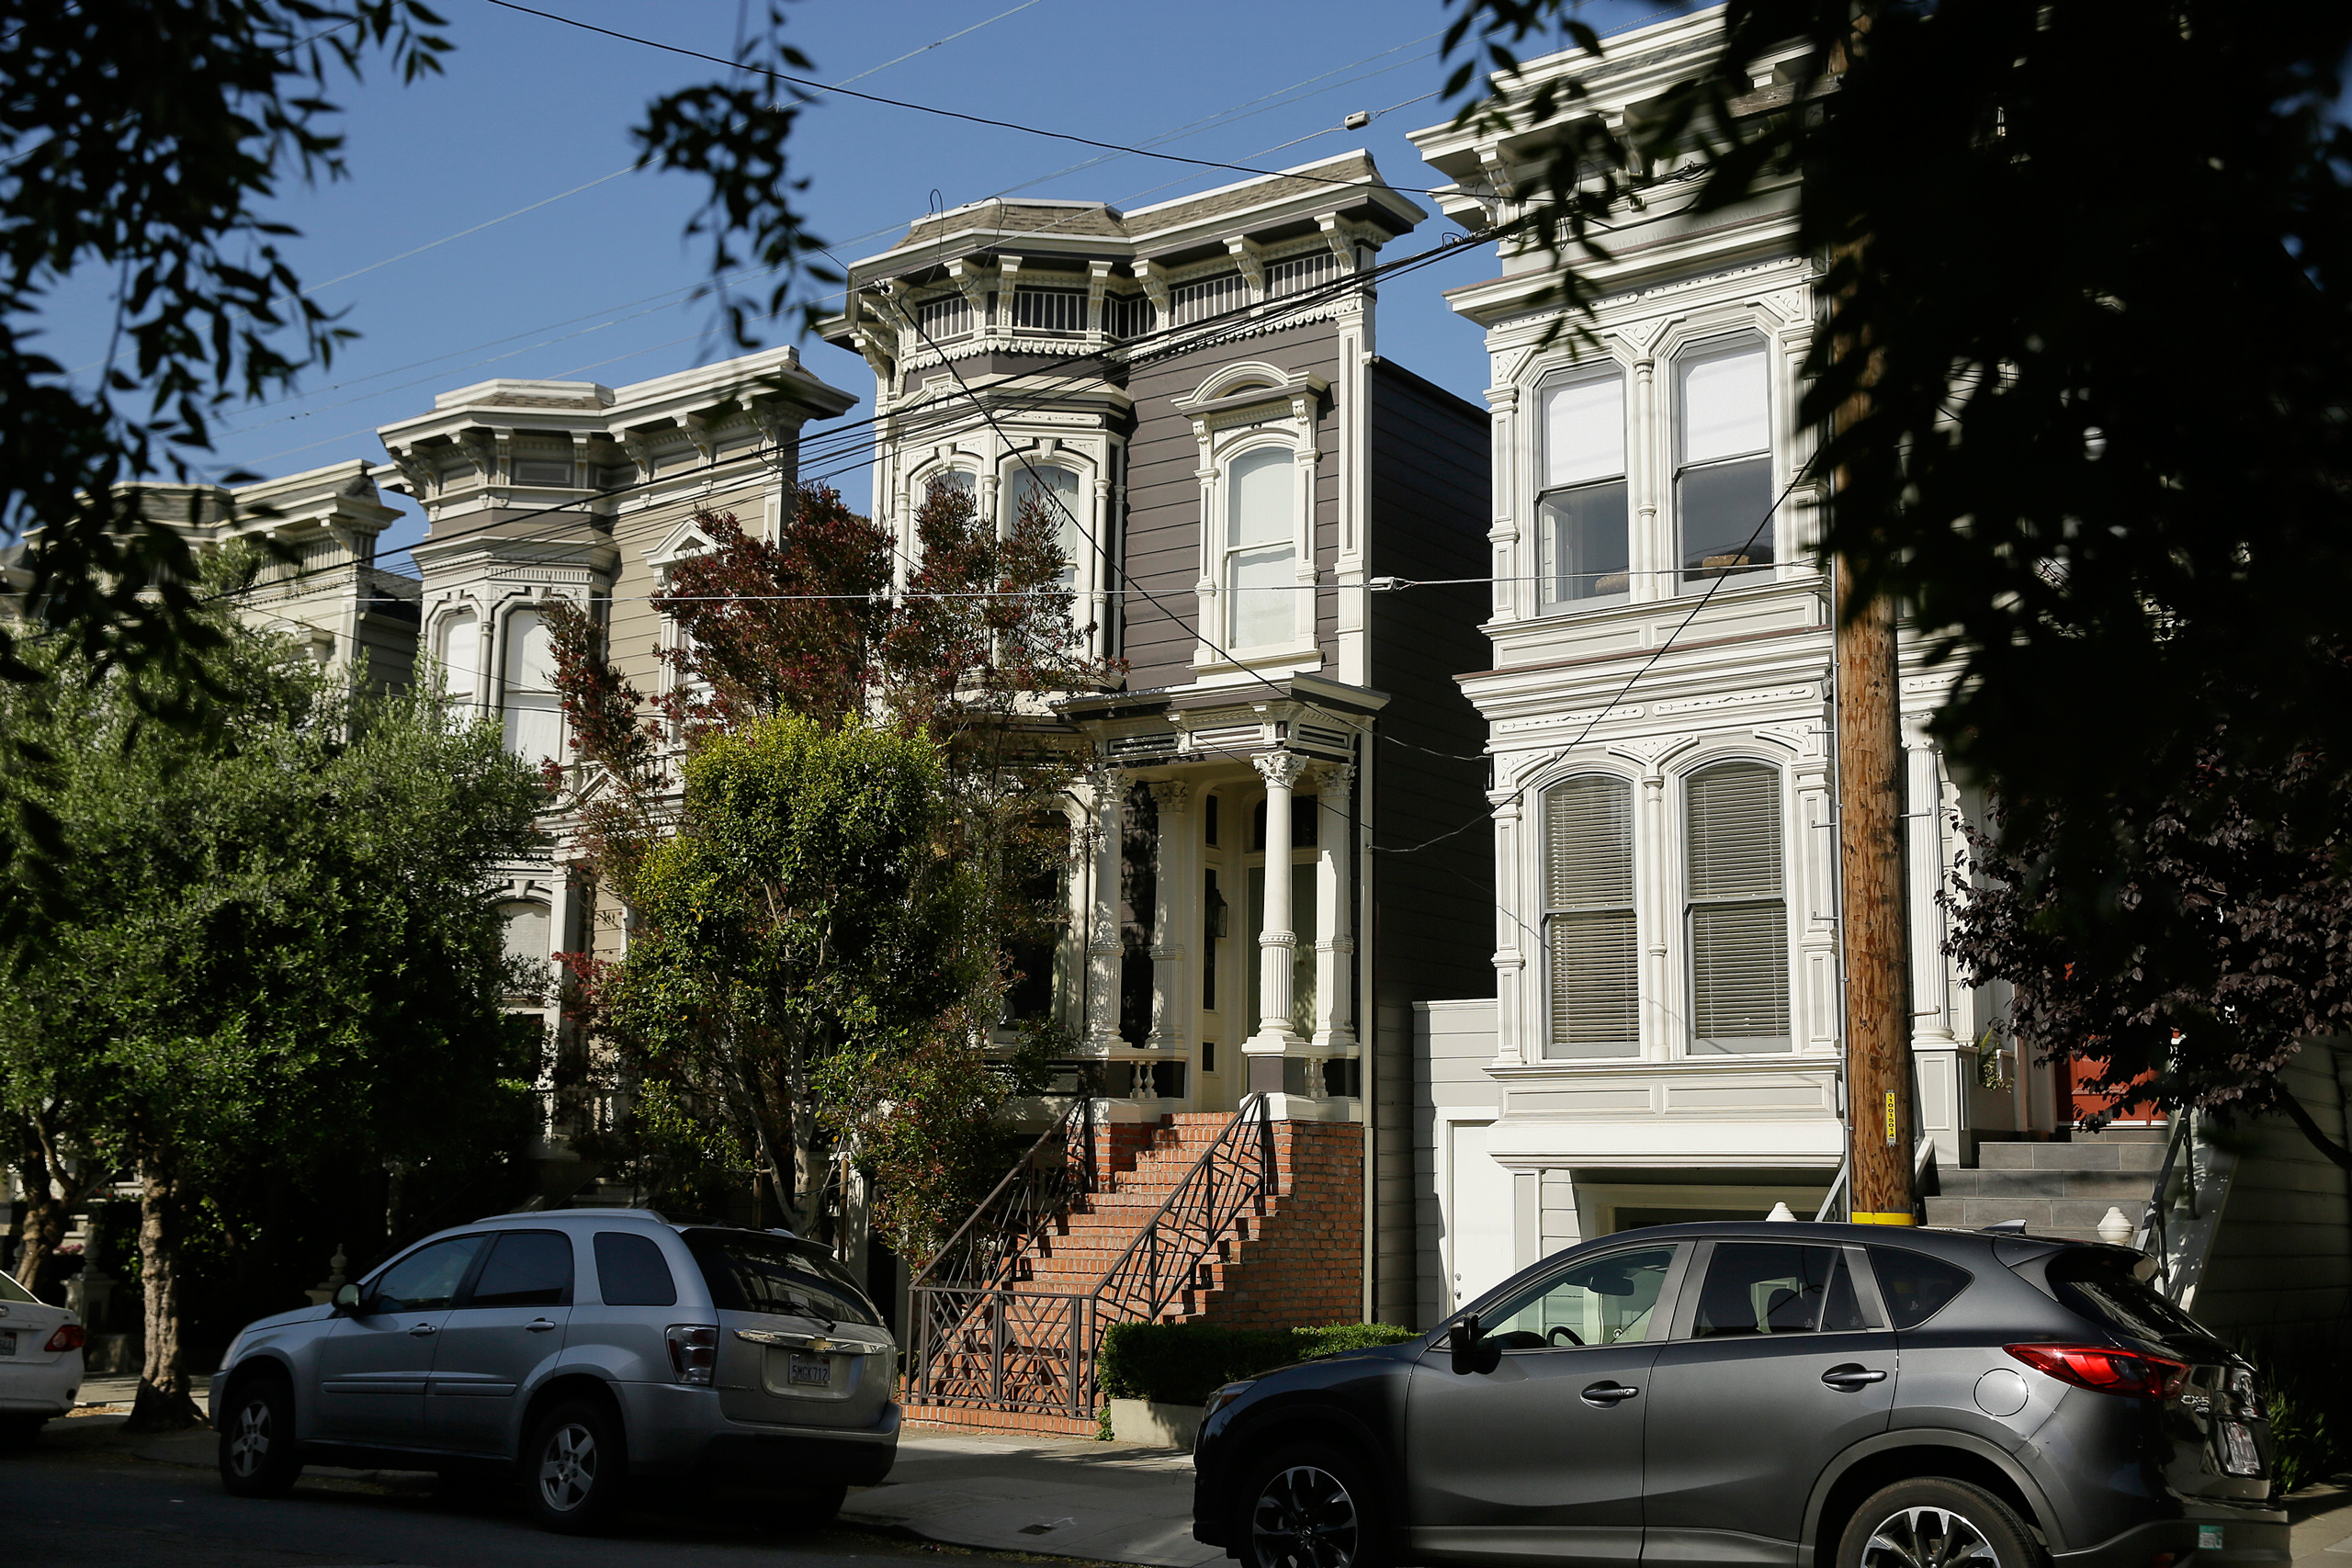 A Victorian home, center, made famous by the television show "Full House" is seen Friday, May 27, 2016, in San Francisco. The three bedroom home dating from 1883 is now for sale at $4.15 million. (Eric Risberg—AP)